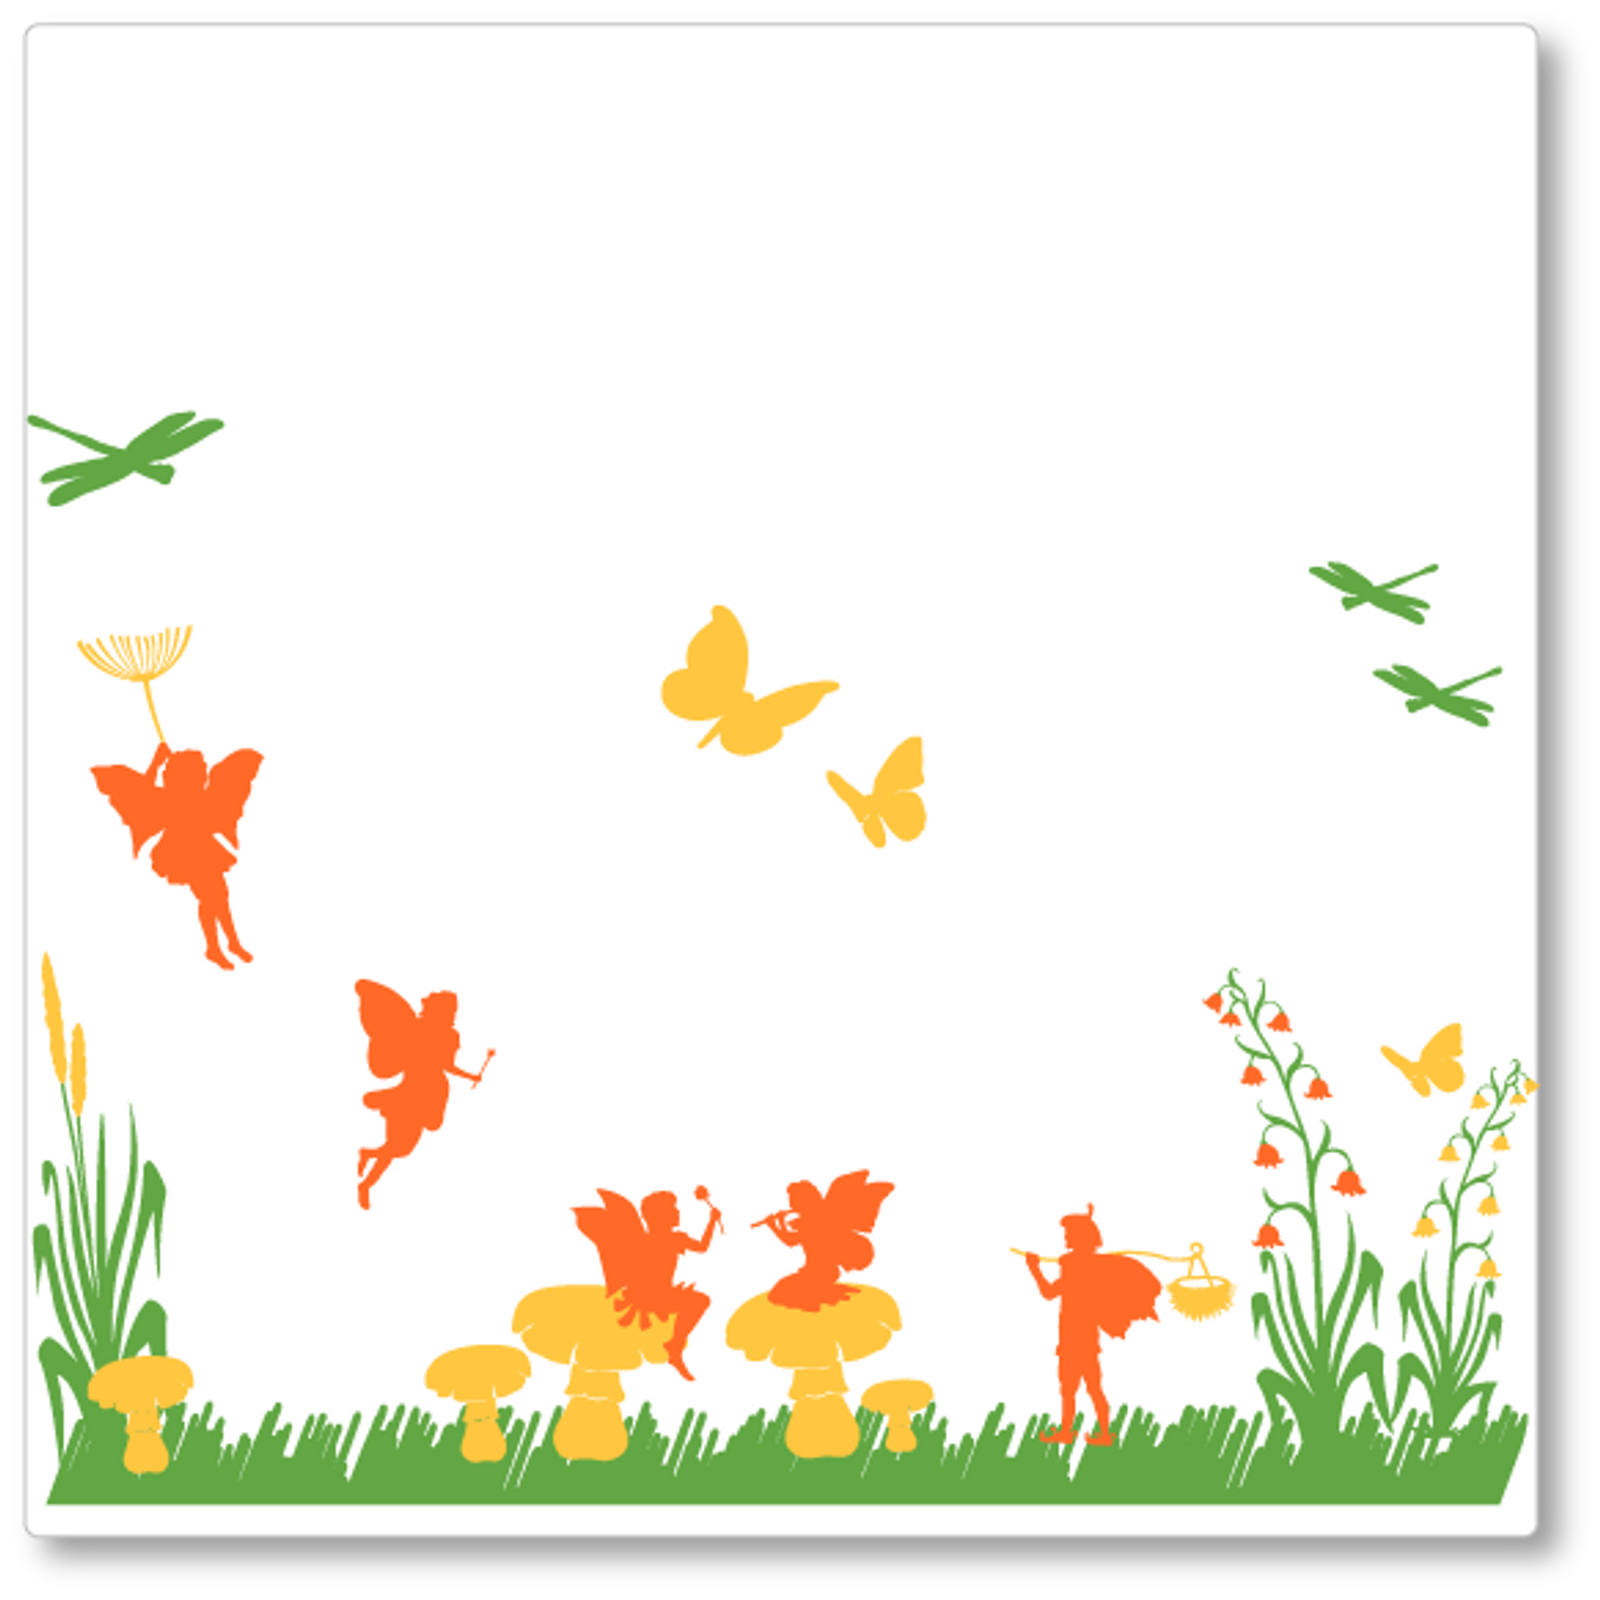 Our fairyland set contains 5 fairies, 5 mushrooms, 3 butterflies and 3 dragon flies, plus grass and flowers. Orange, yellow and green.